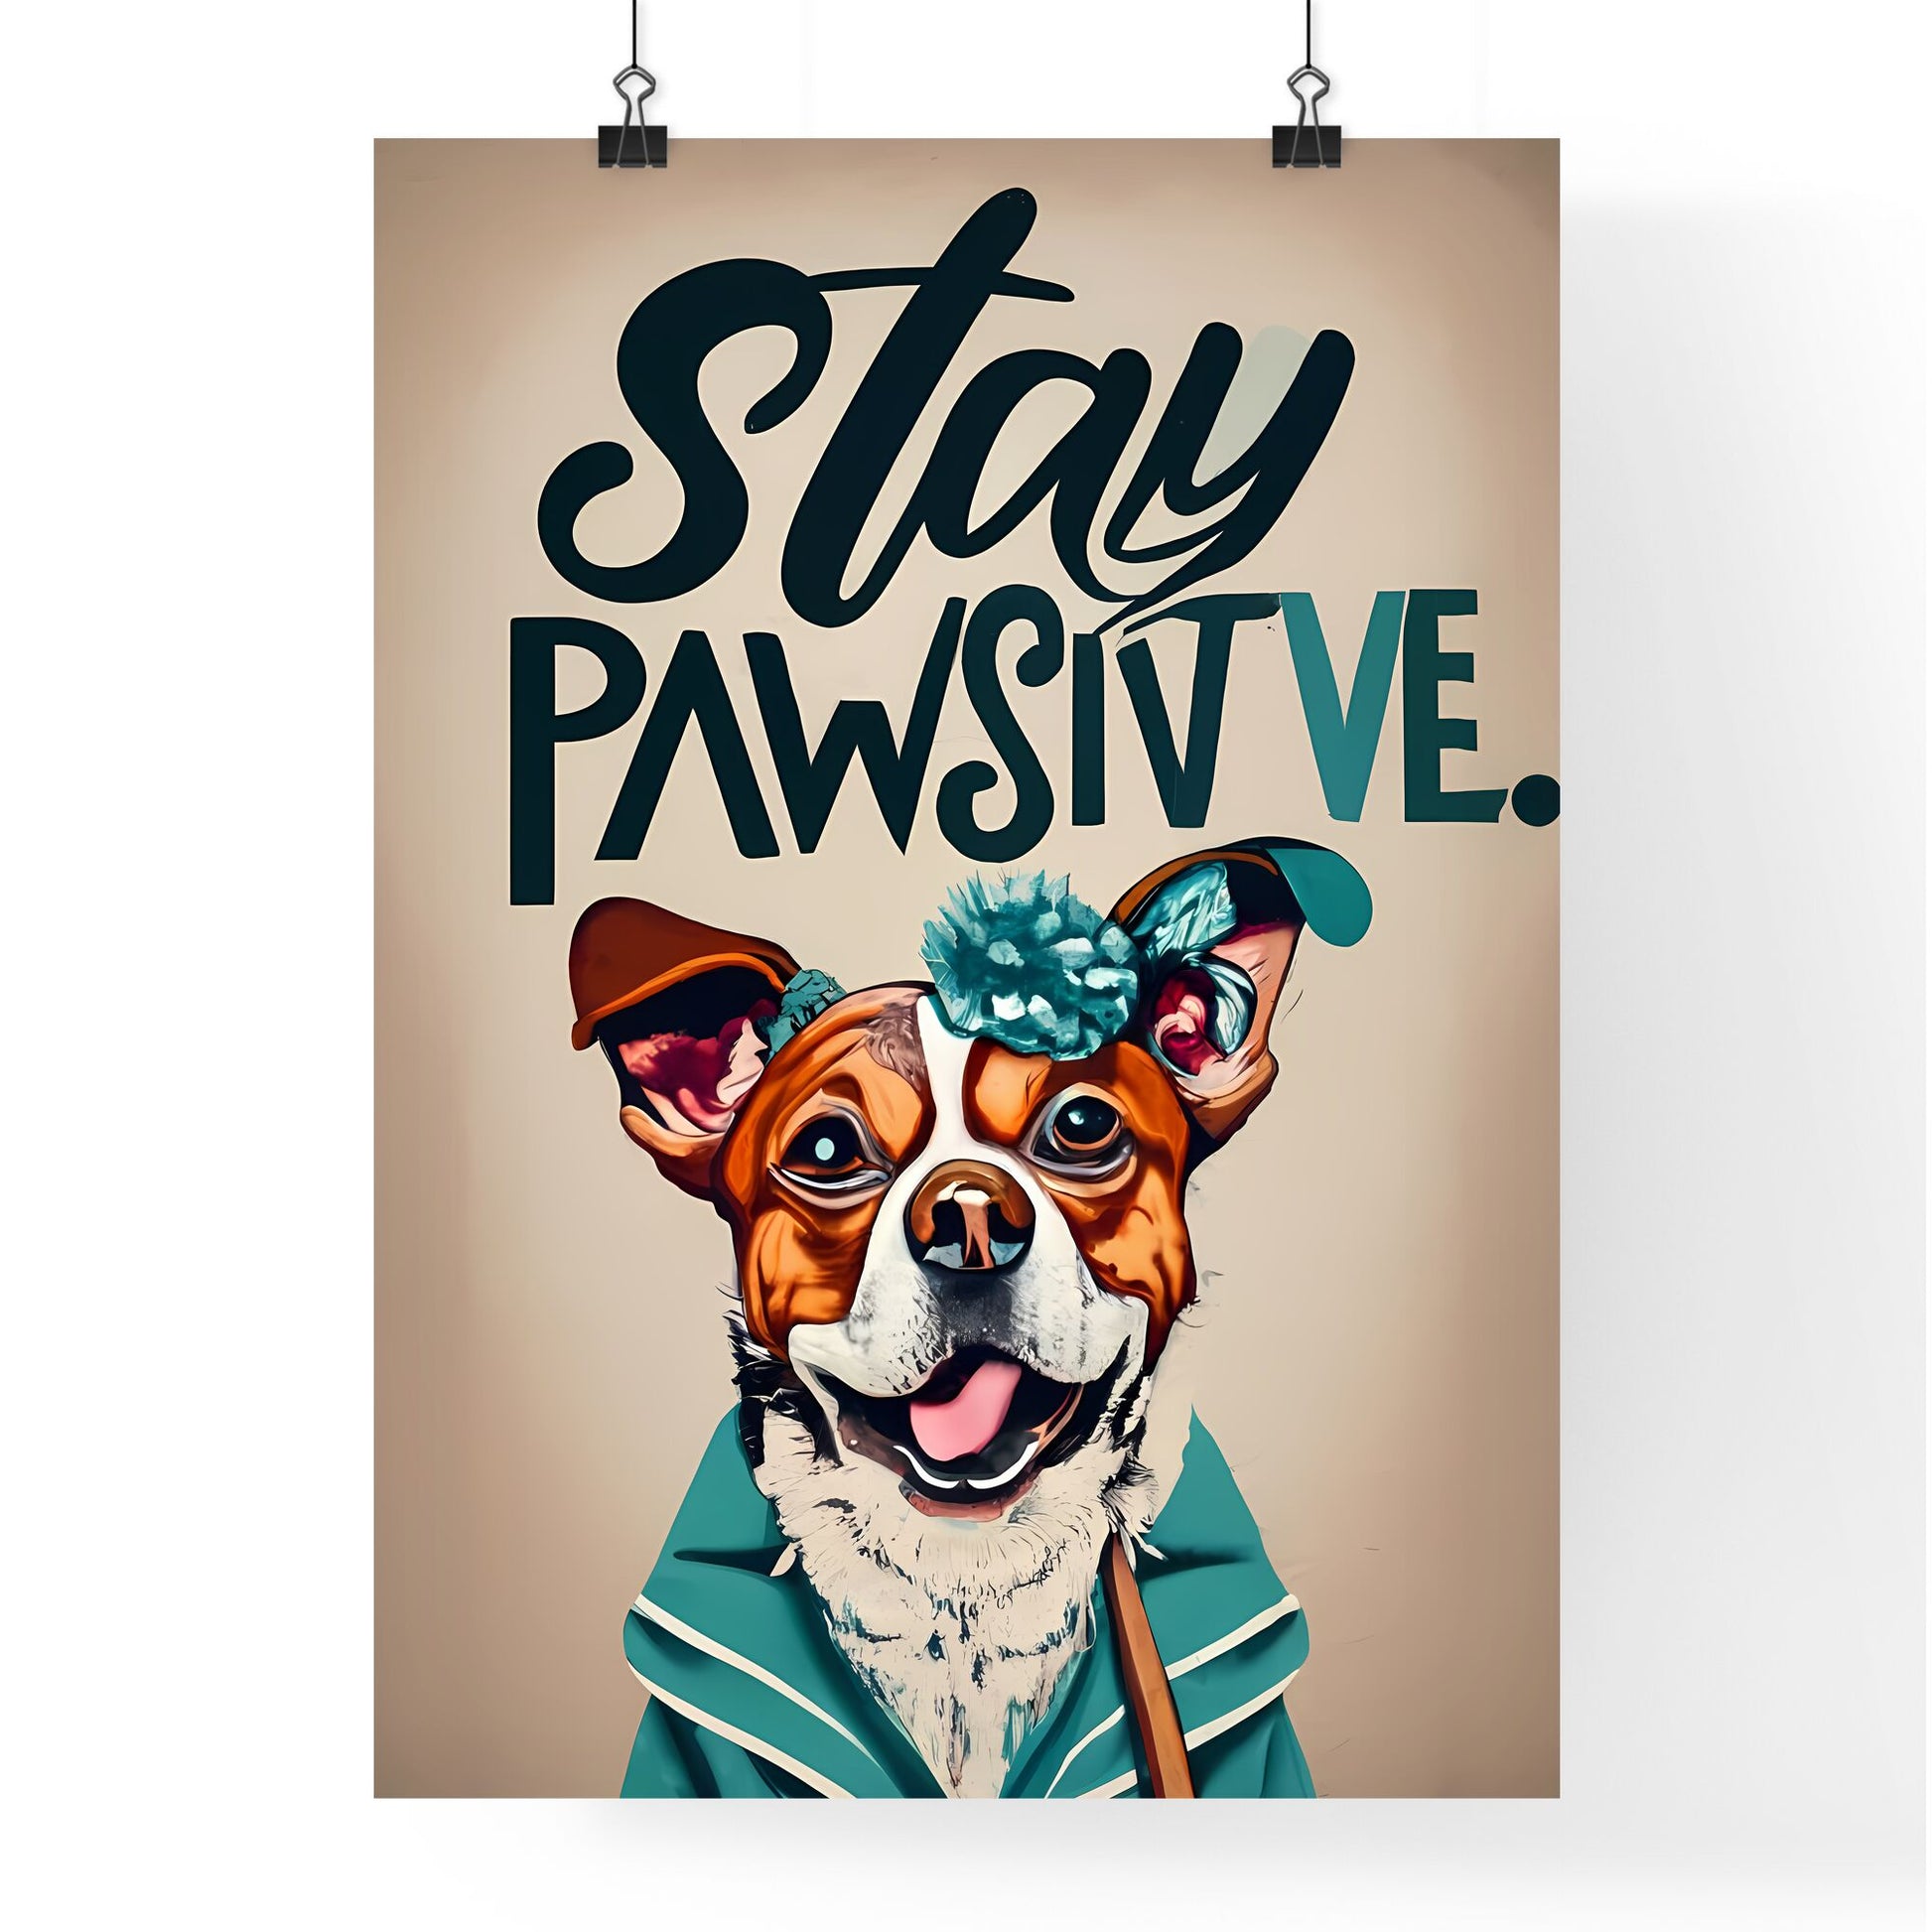 Stay Pawsitive - A Dog Wearing A Blue Jacket Default Title